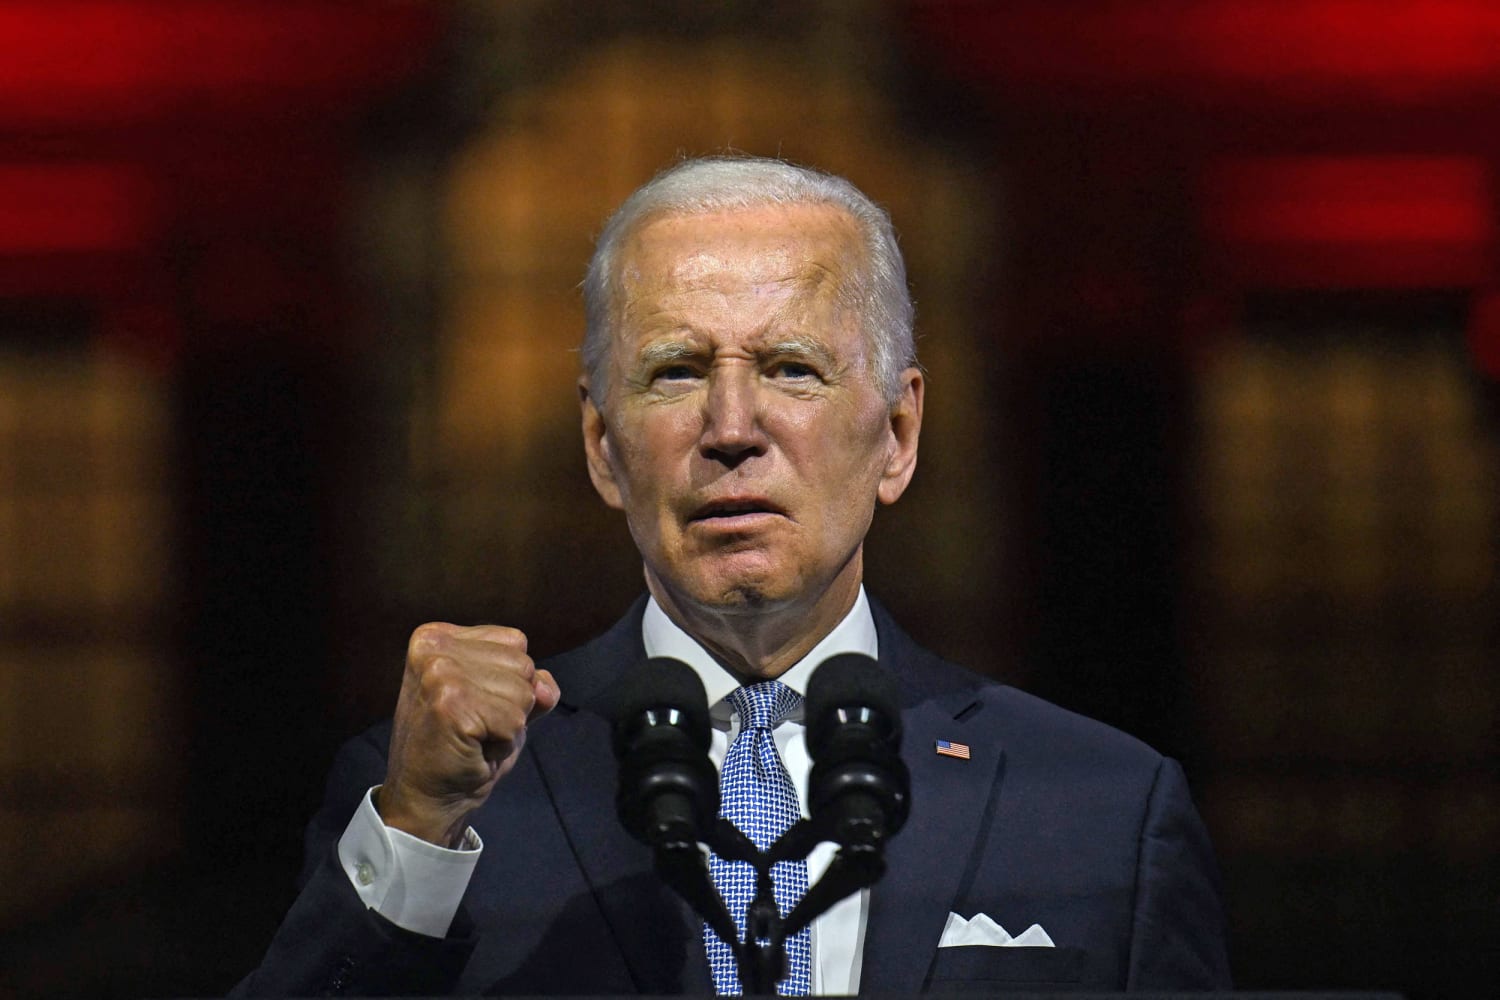 In a blistering speech, Biden says ‘democracy cannot survive’ under MAGA extremism